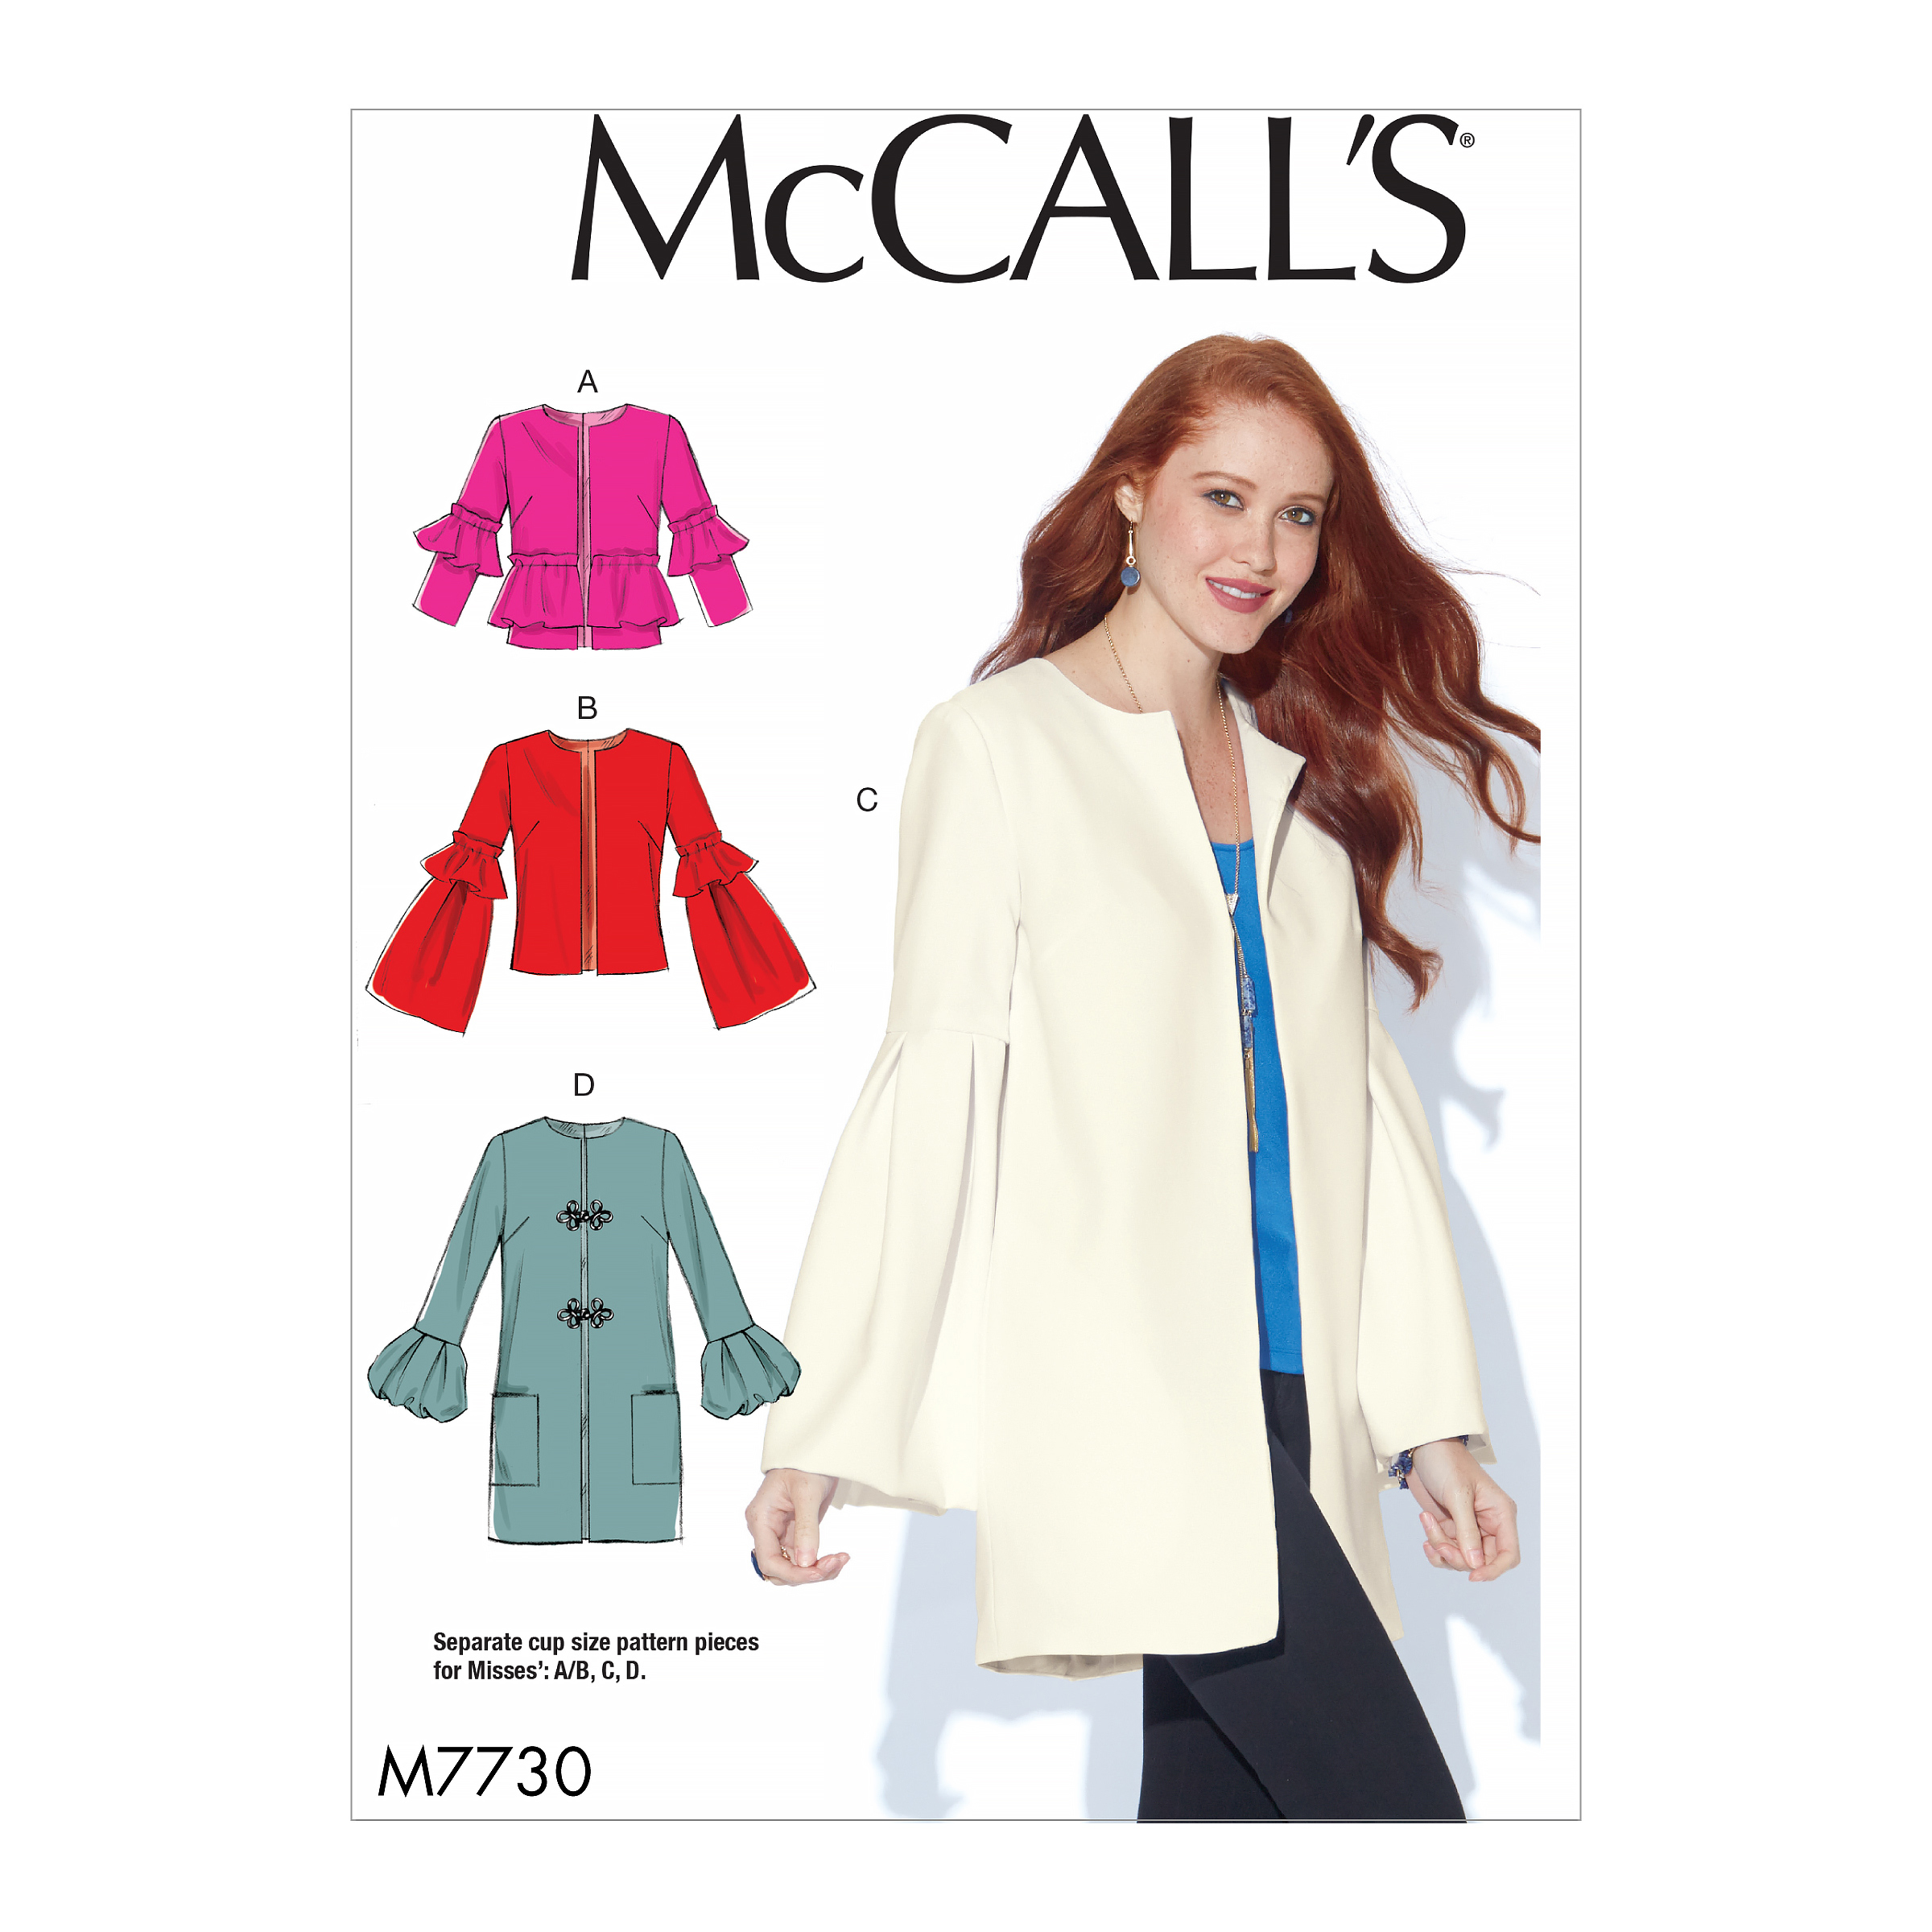 New McCall’s Early Spring Catalog - Jan 2018 1/23/18 - PatternReview ...